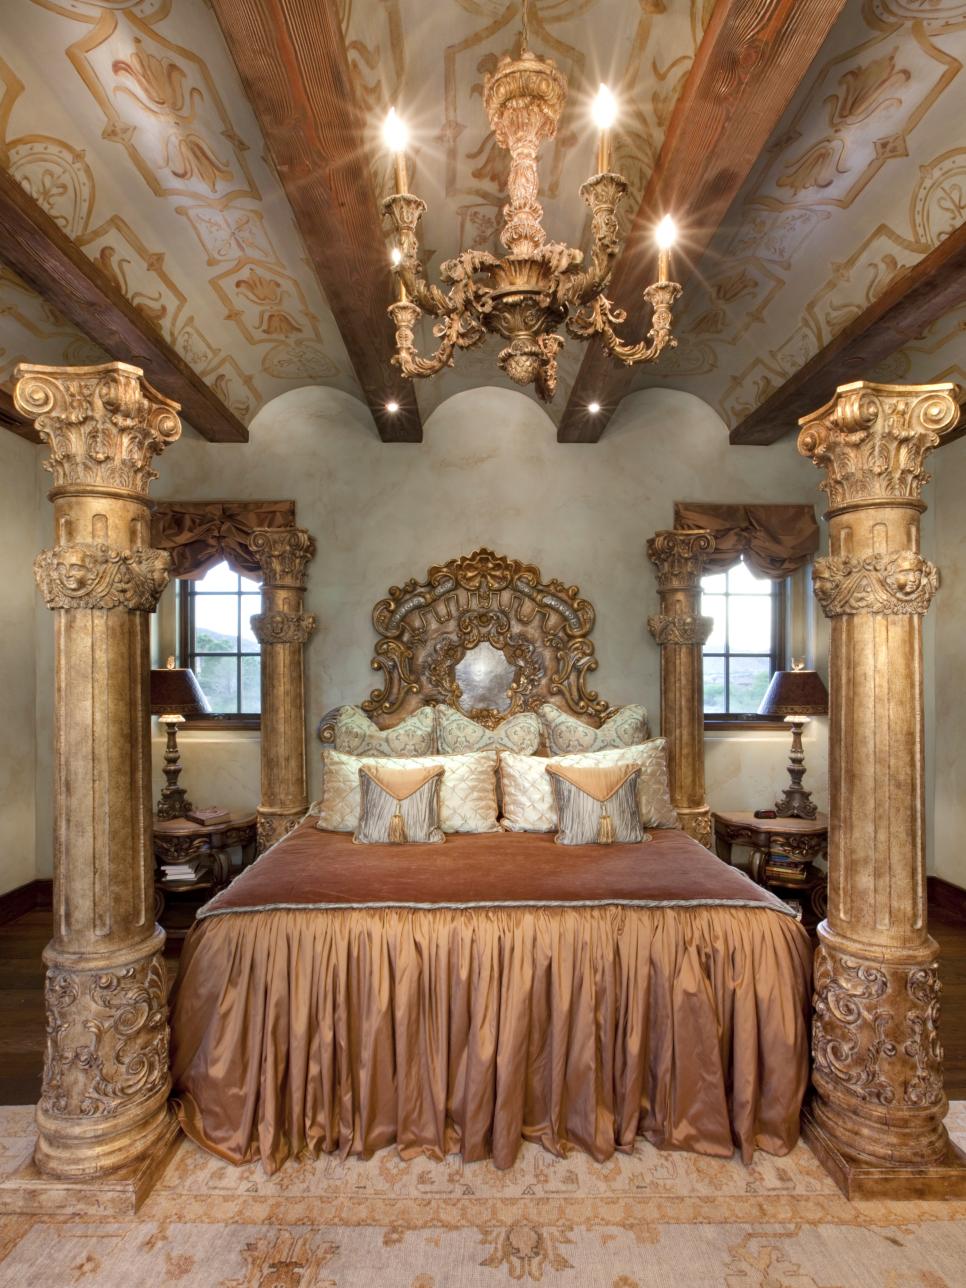 Opulent Old World-Style Bedroom With Gold Columns